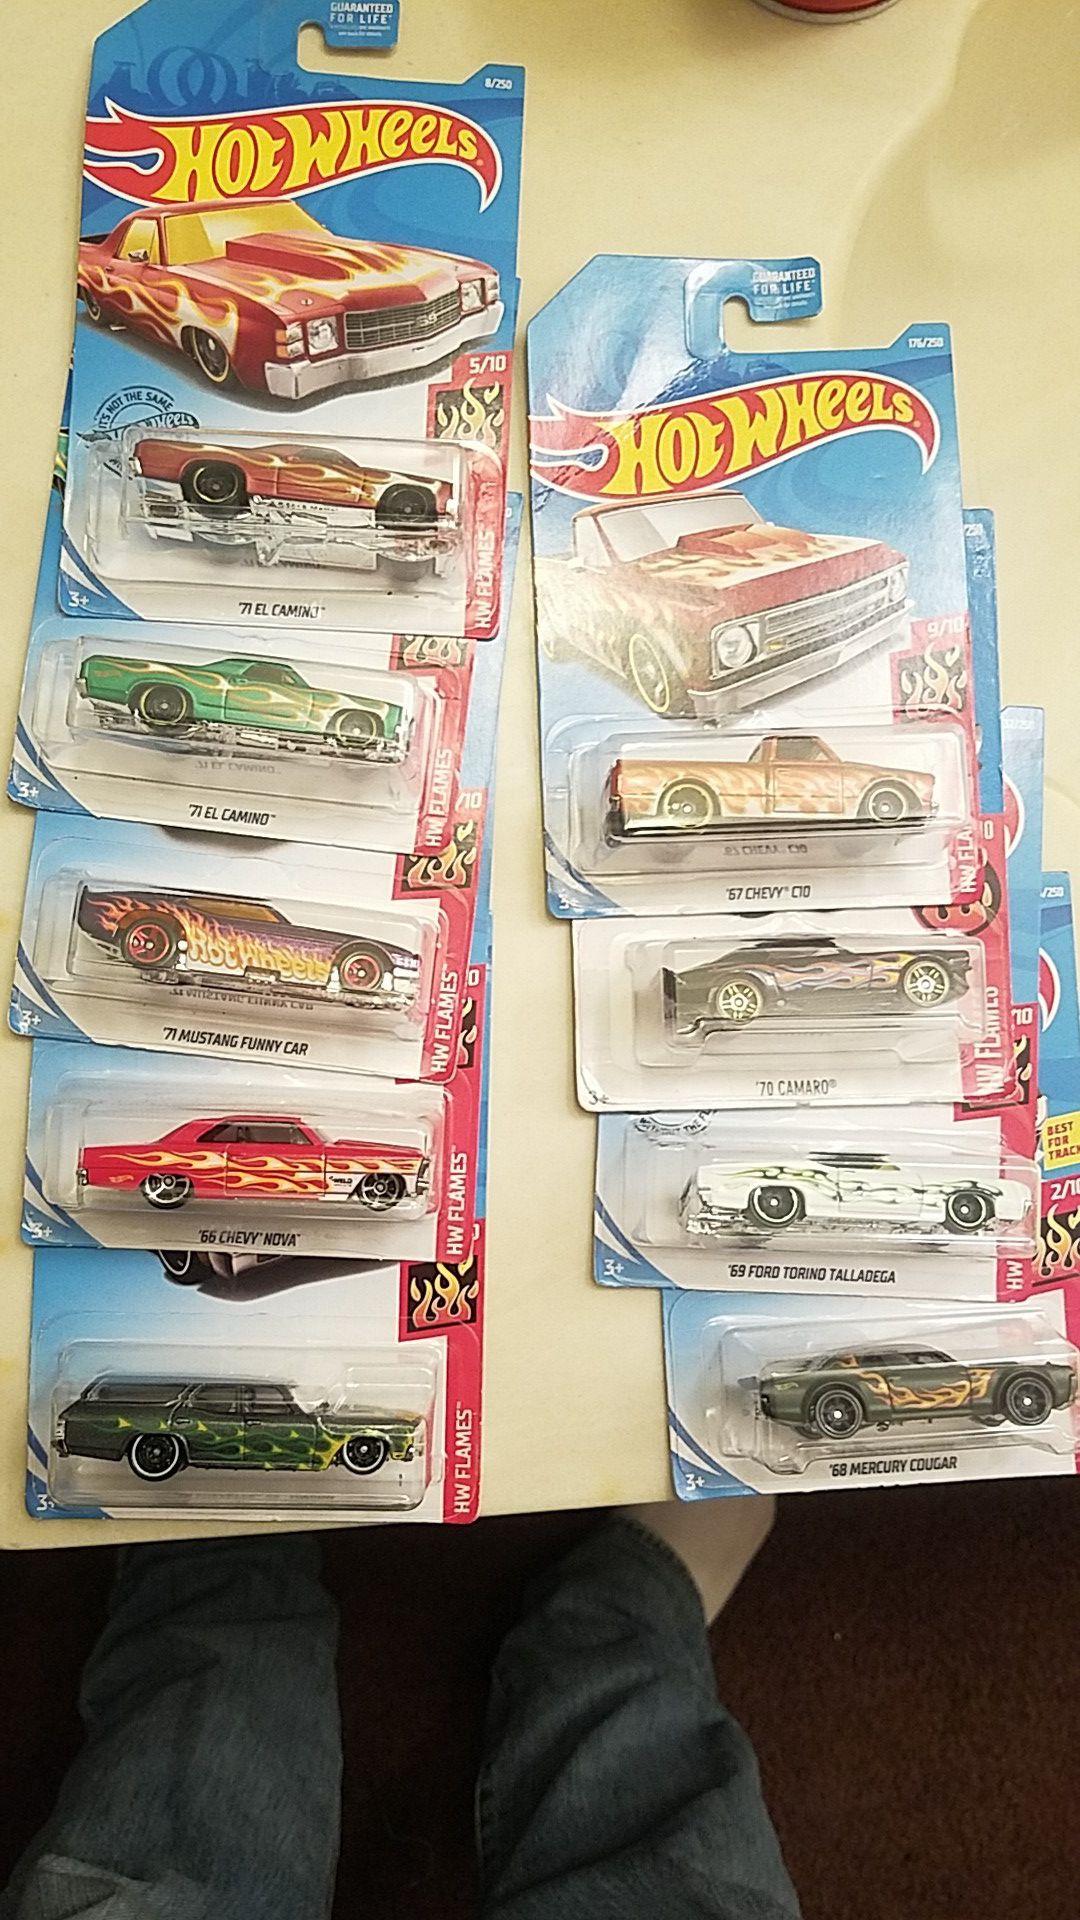 9 Hot Wheel flame Editions